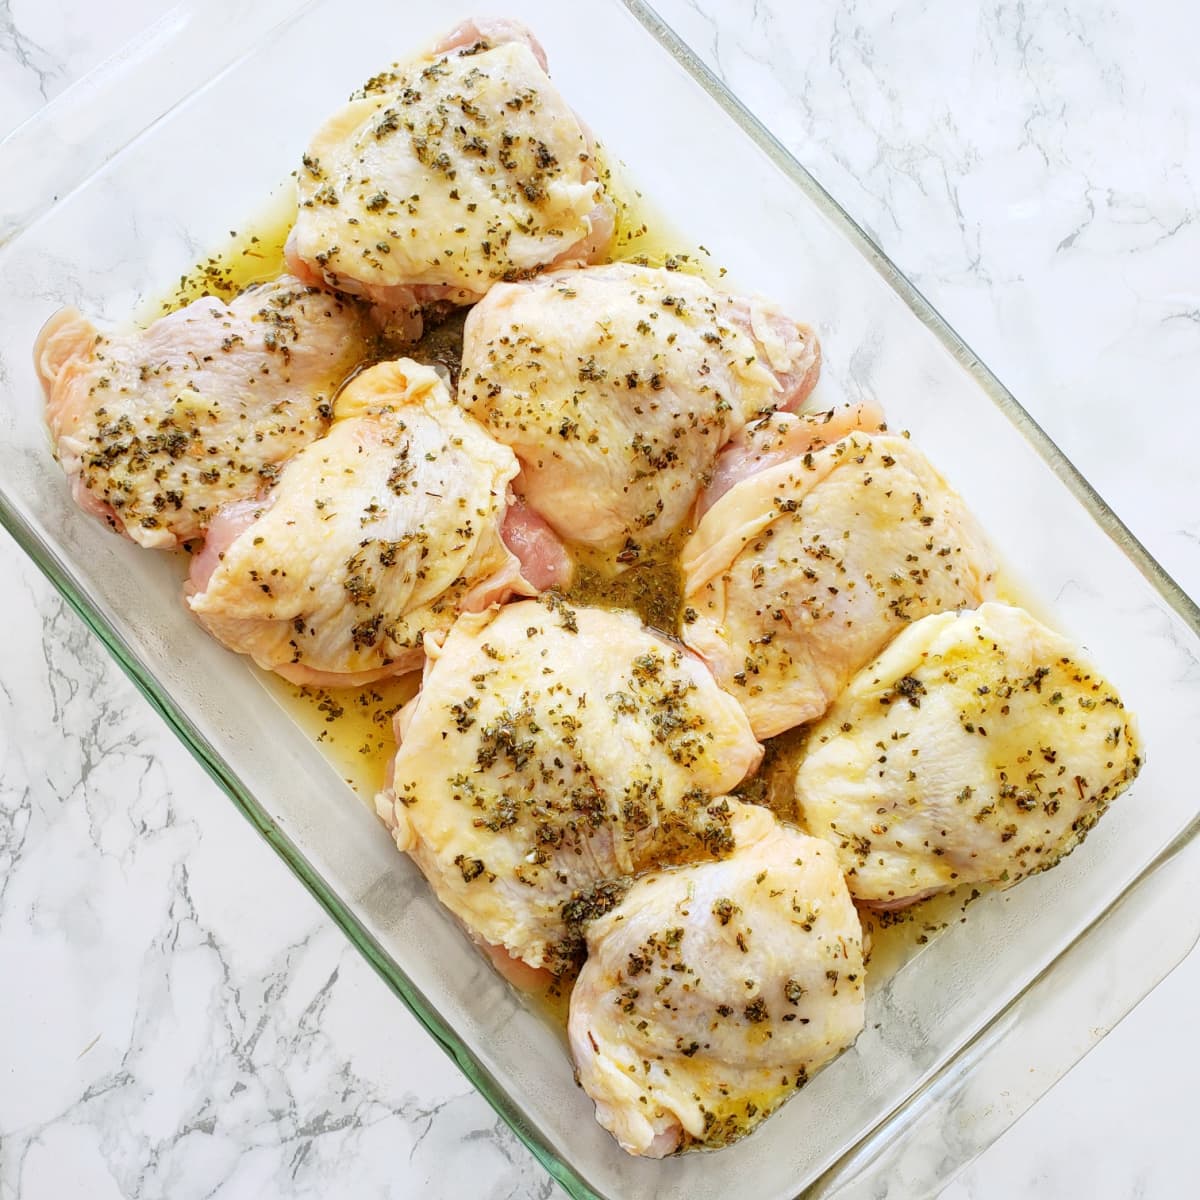 8 chicken thighs in a glass baking dish set on a white marble counter